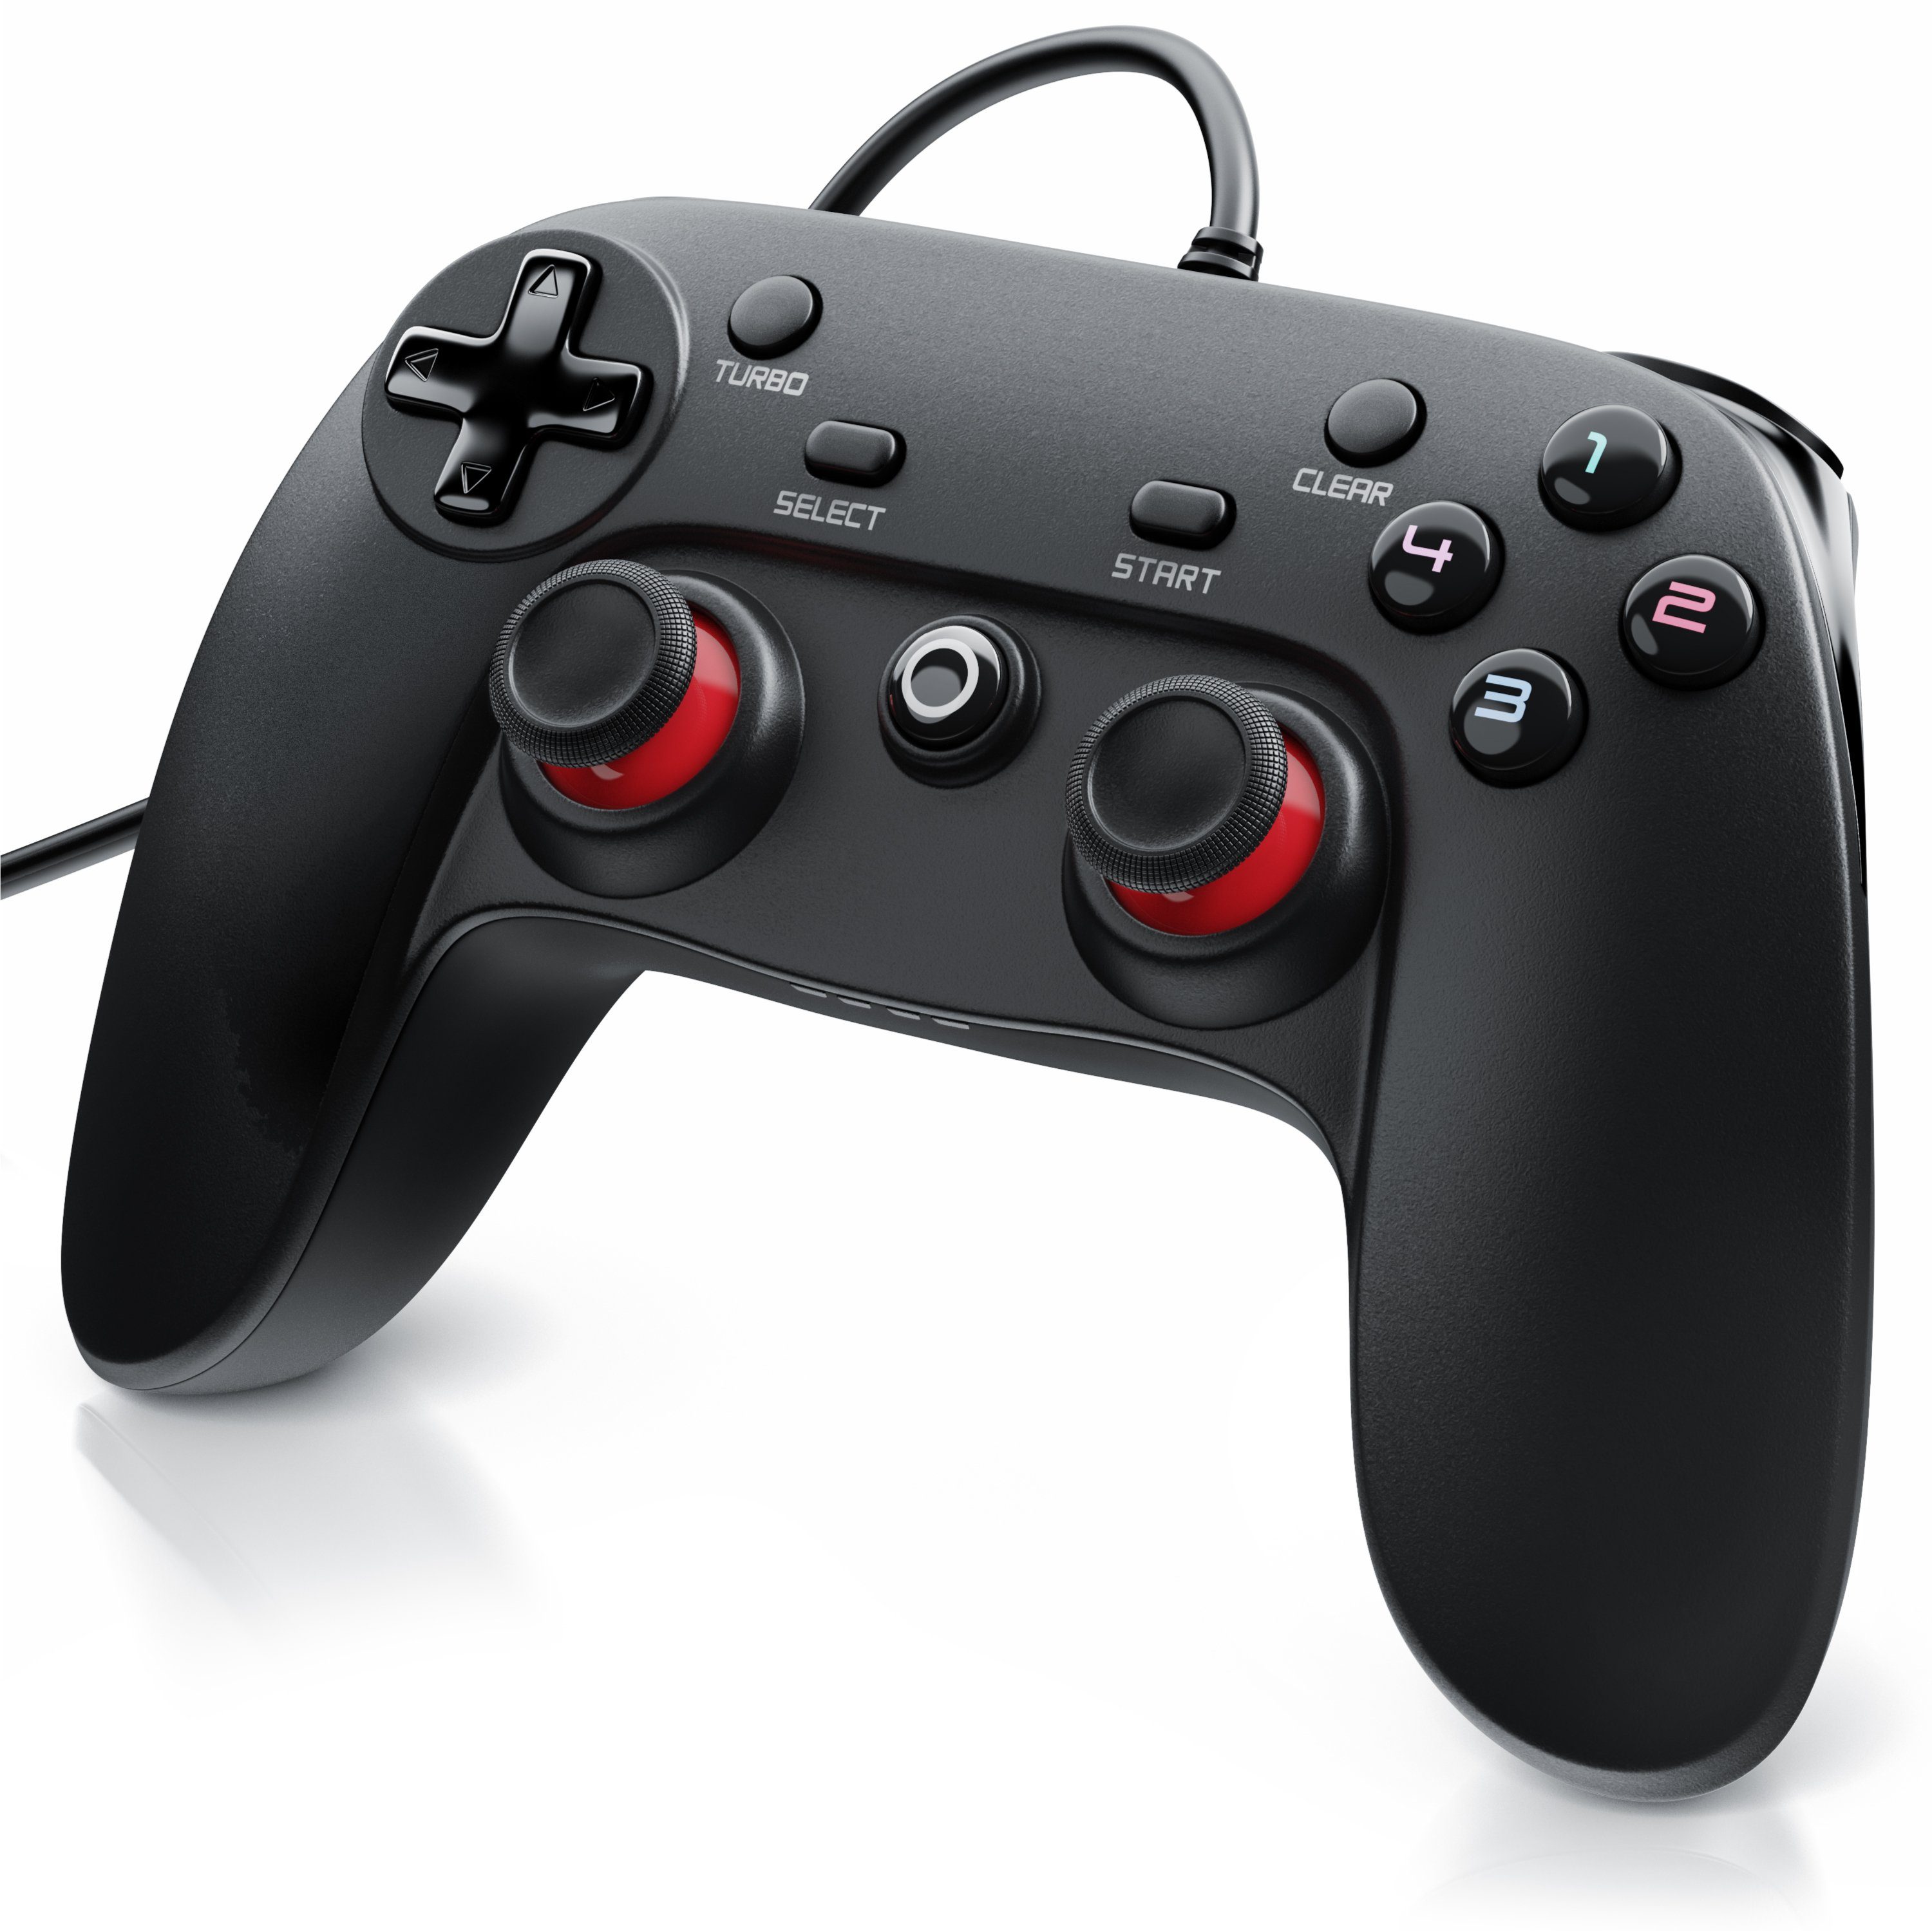 & St., (1 Gaming-Controller X-Input) Vibration, PS3 PC Funktion, Direct & CSL Turbo Gamepad, Dual